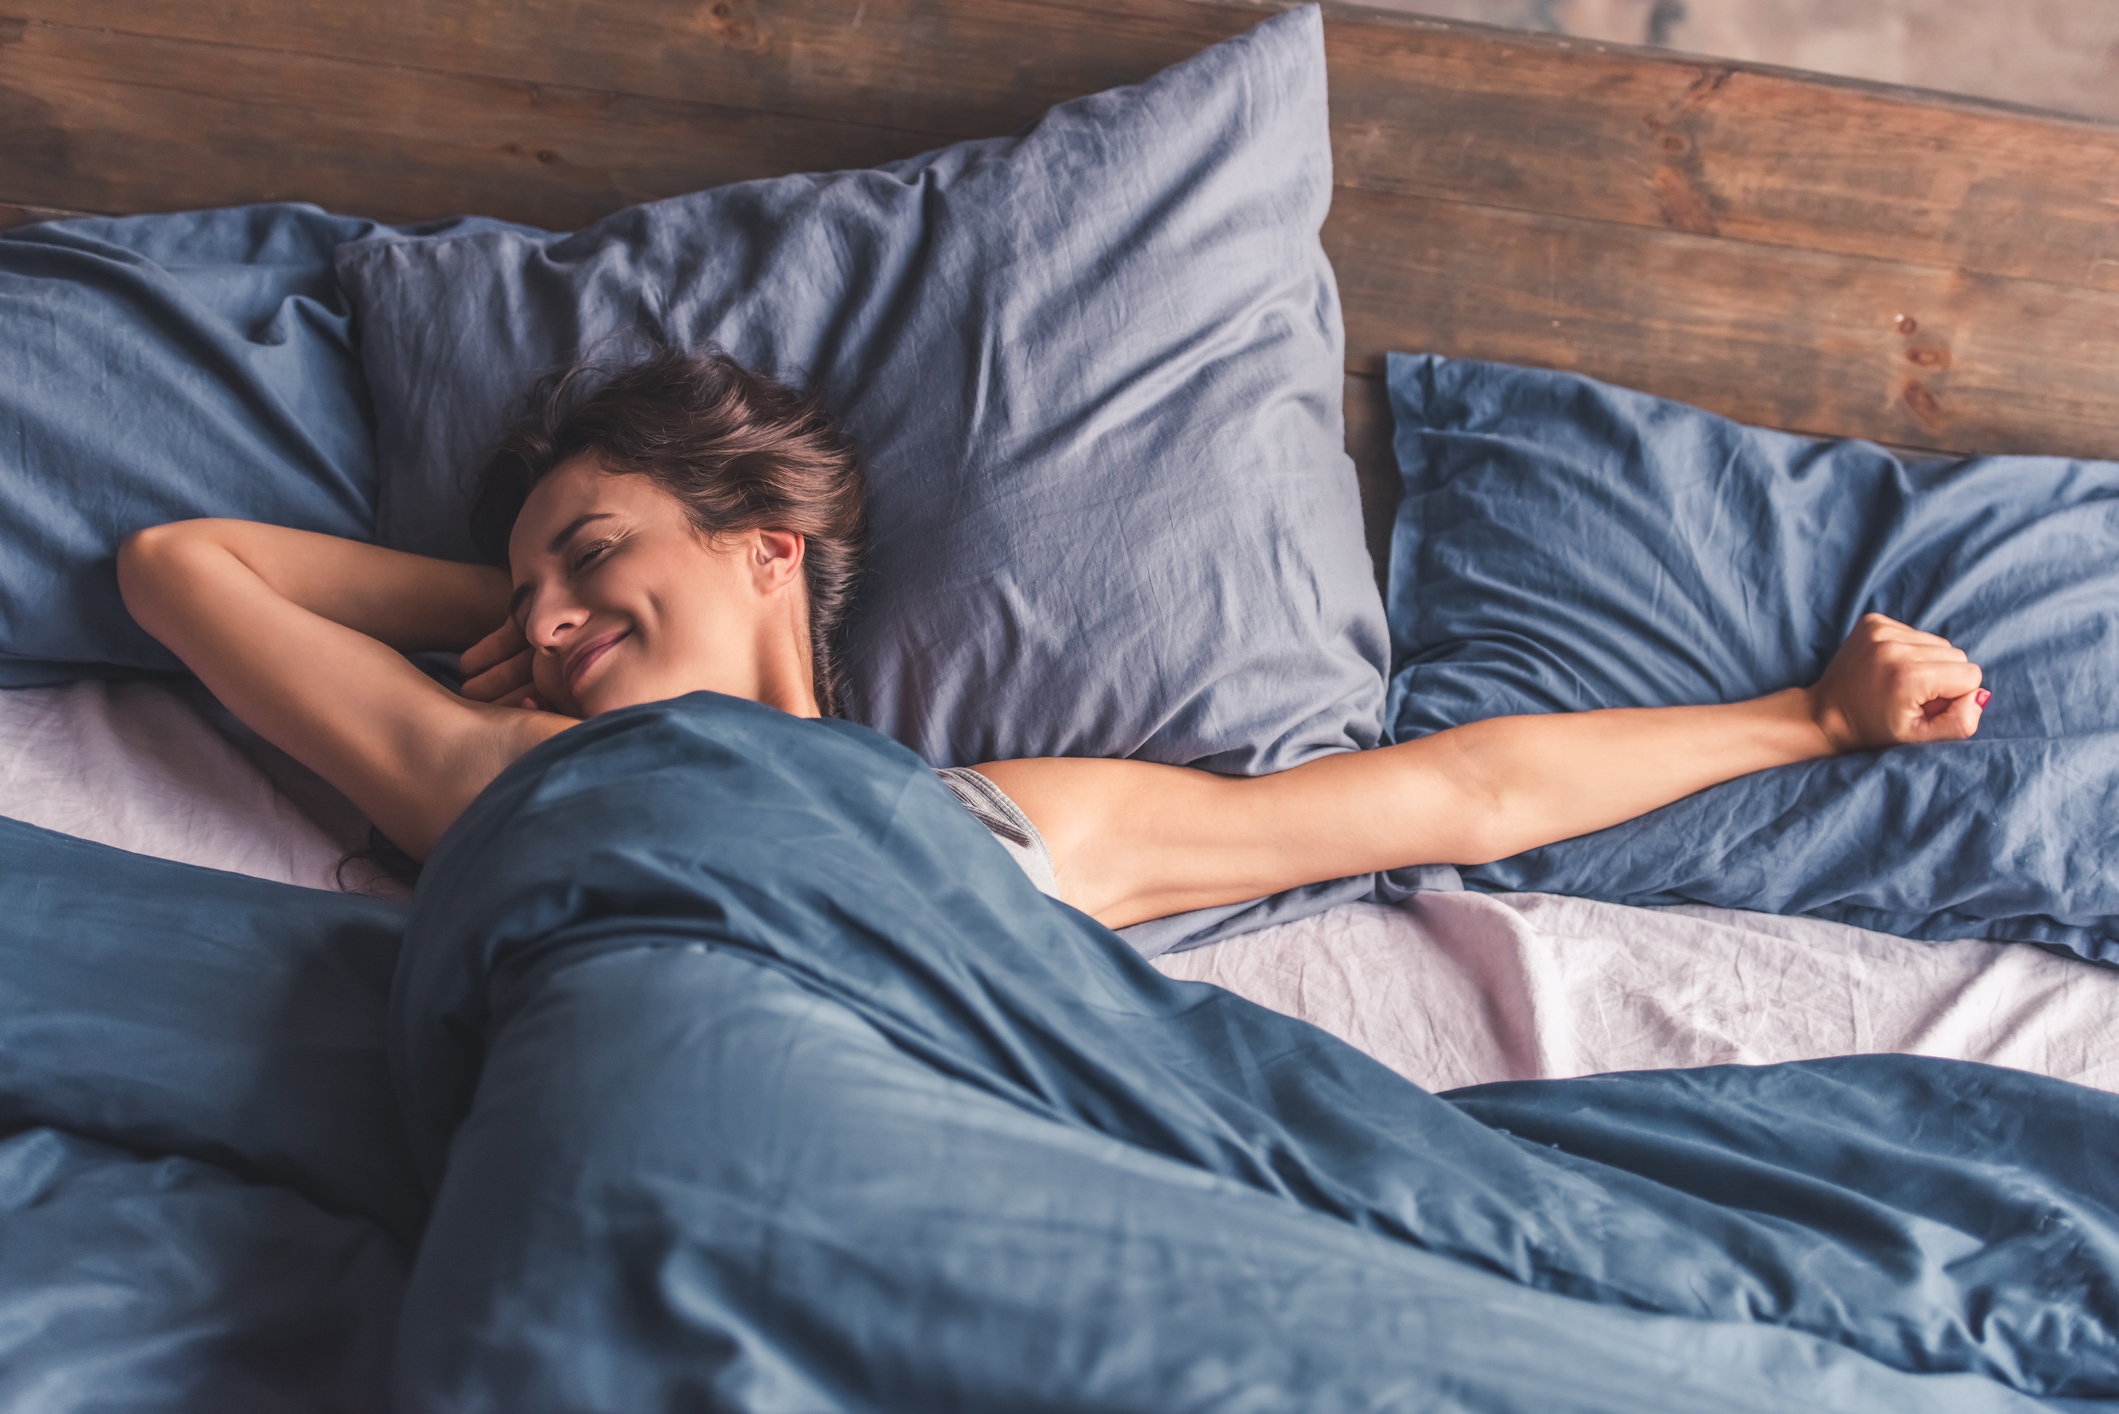 Wellness Wednesday: The Wrong Side Of The Bed